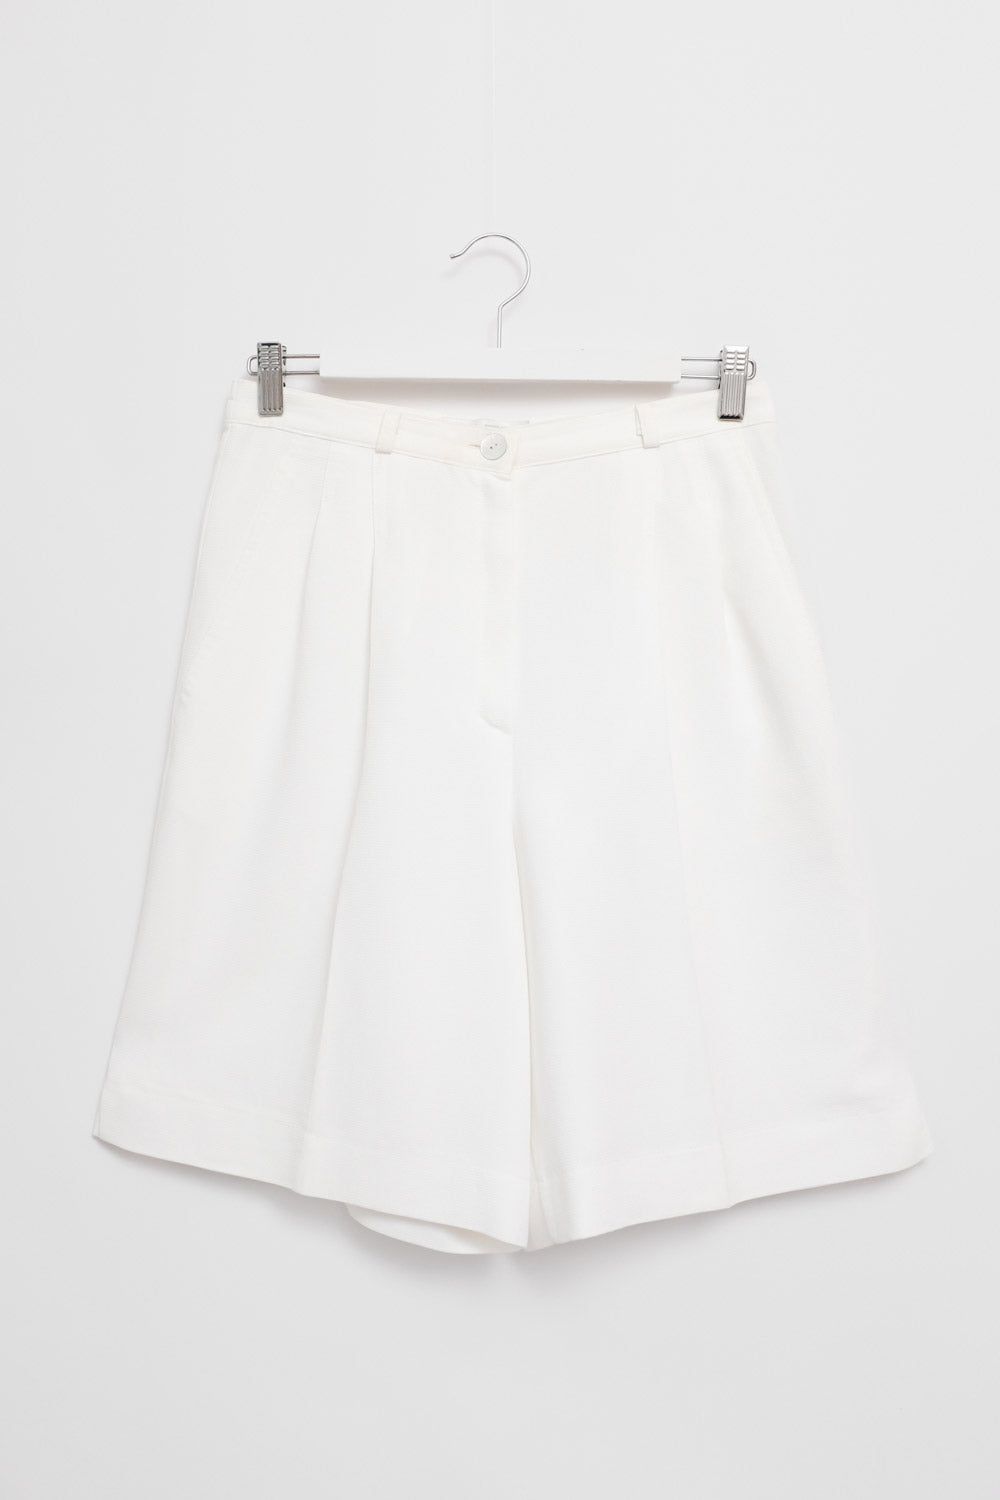 PLEATED WHITE CLASSY VINTAGE SHORTS